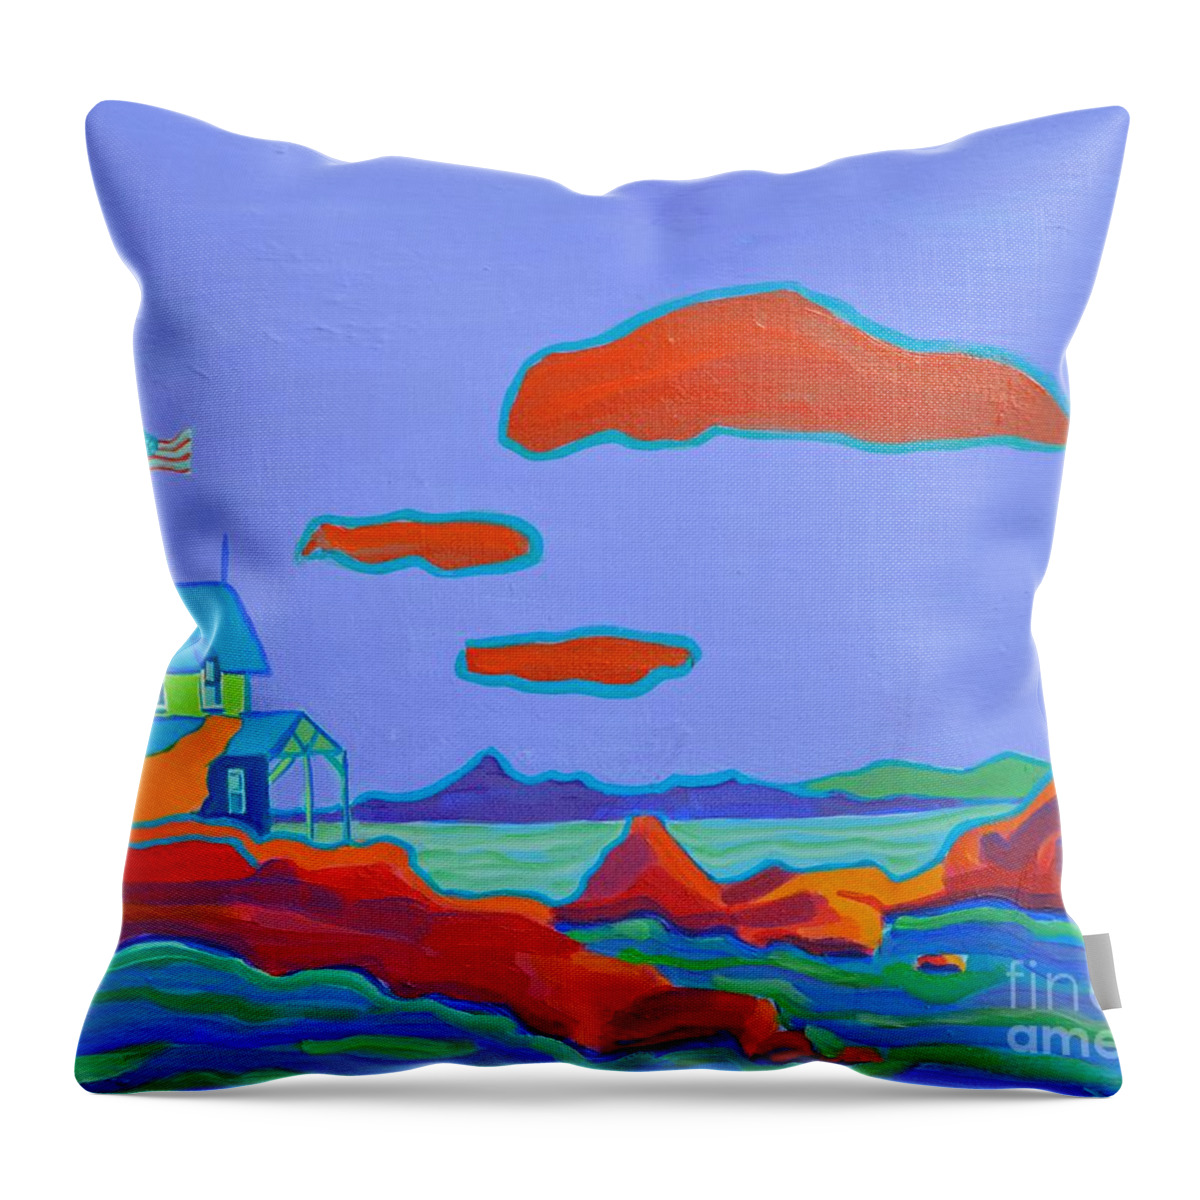 Gloucester Throw Pillow featuring the painting Research Jetty Gloucester by Debra Bretton Robinson